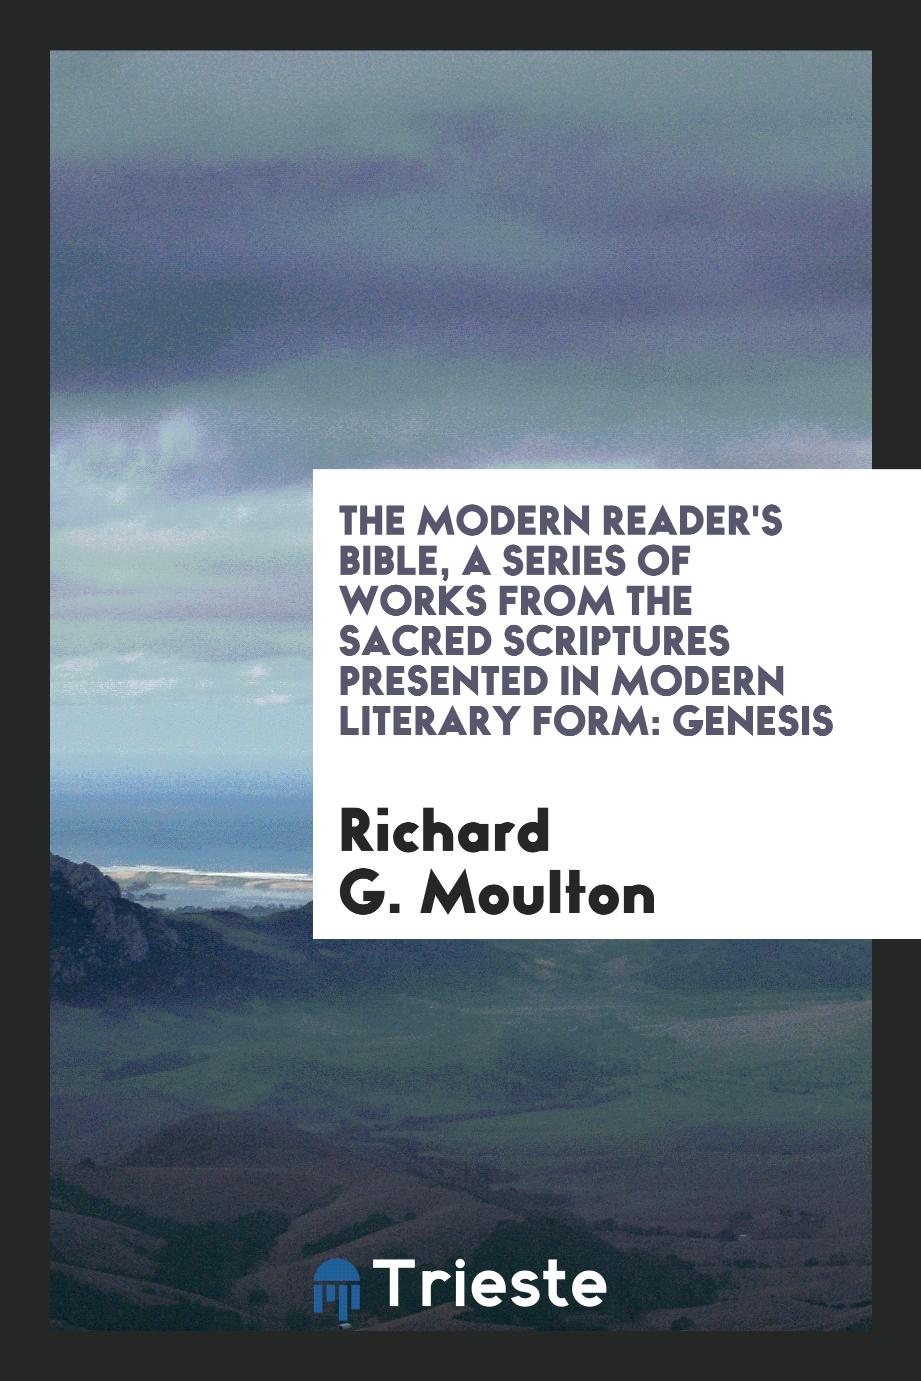 The Modern Reader's Bible, a Series of Works from the Sacred Scriptures Presented in Modern Literary Form: Genesis